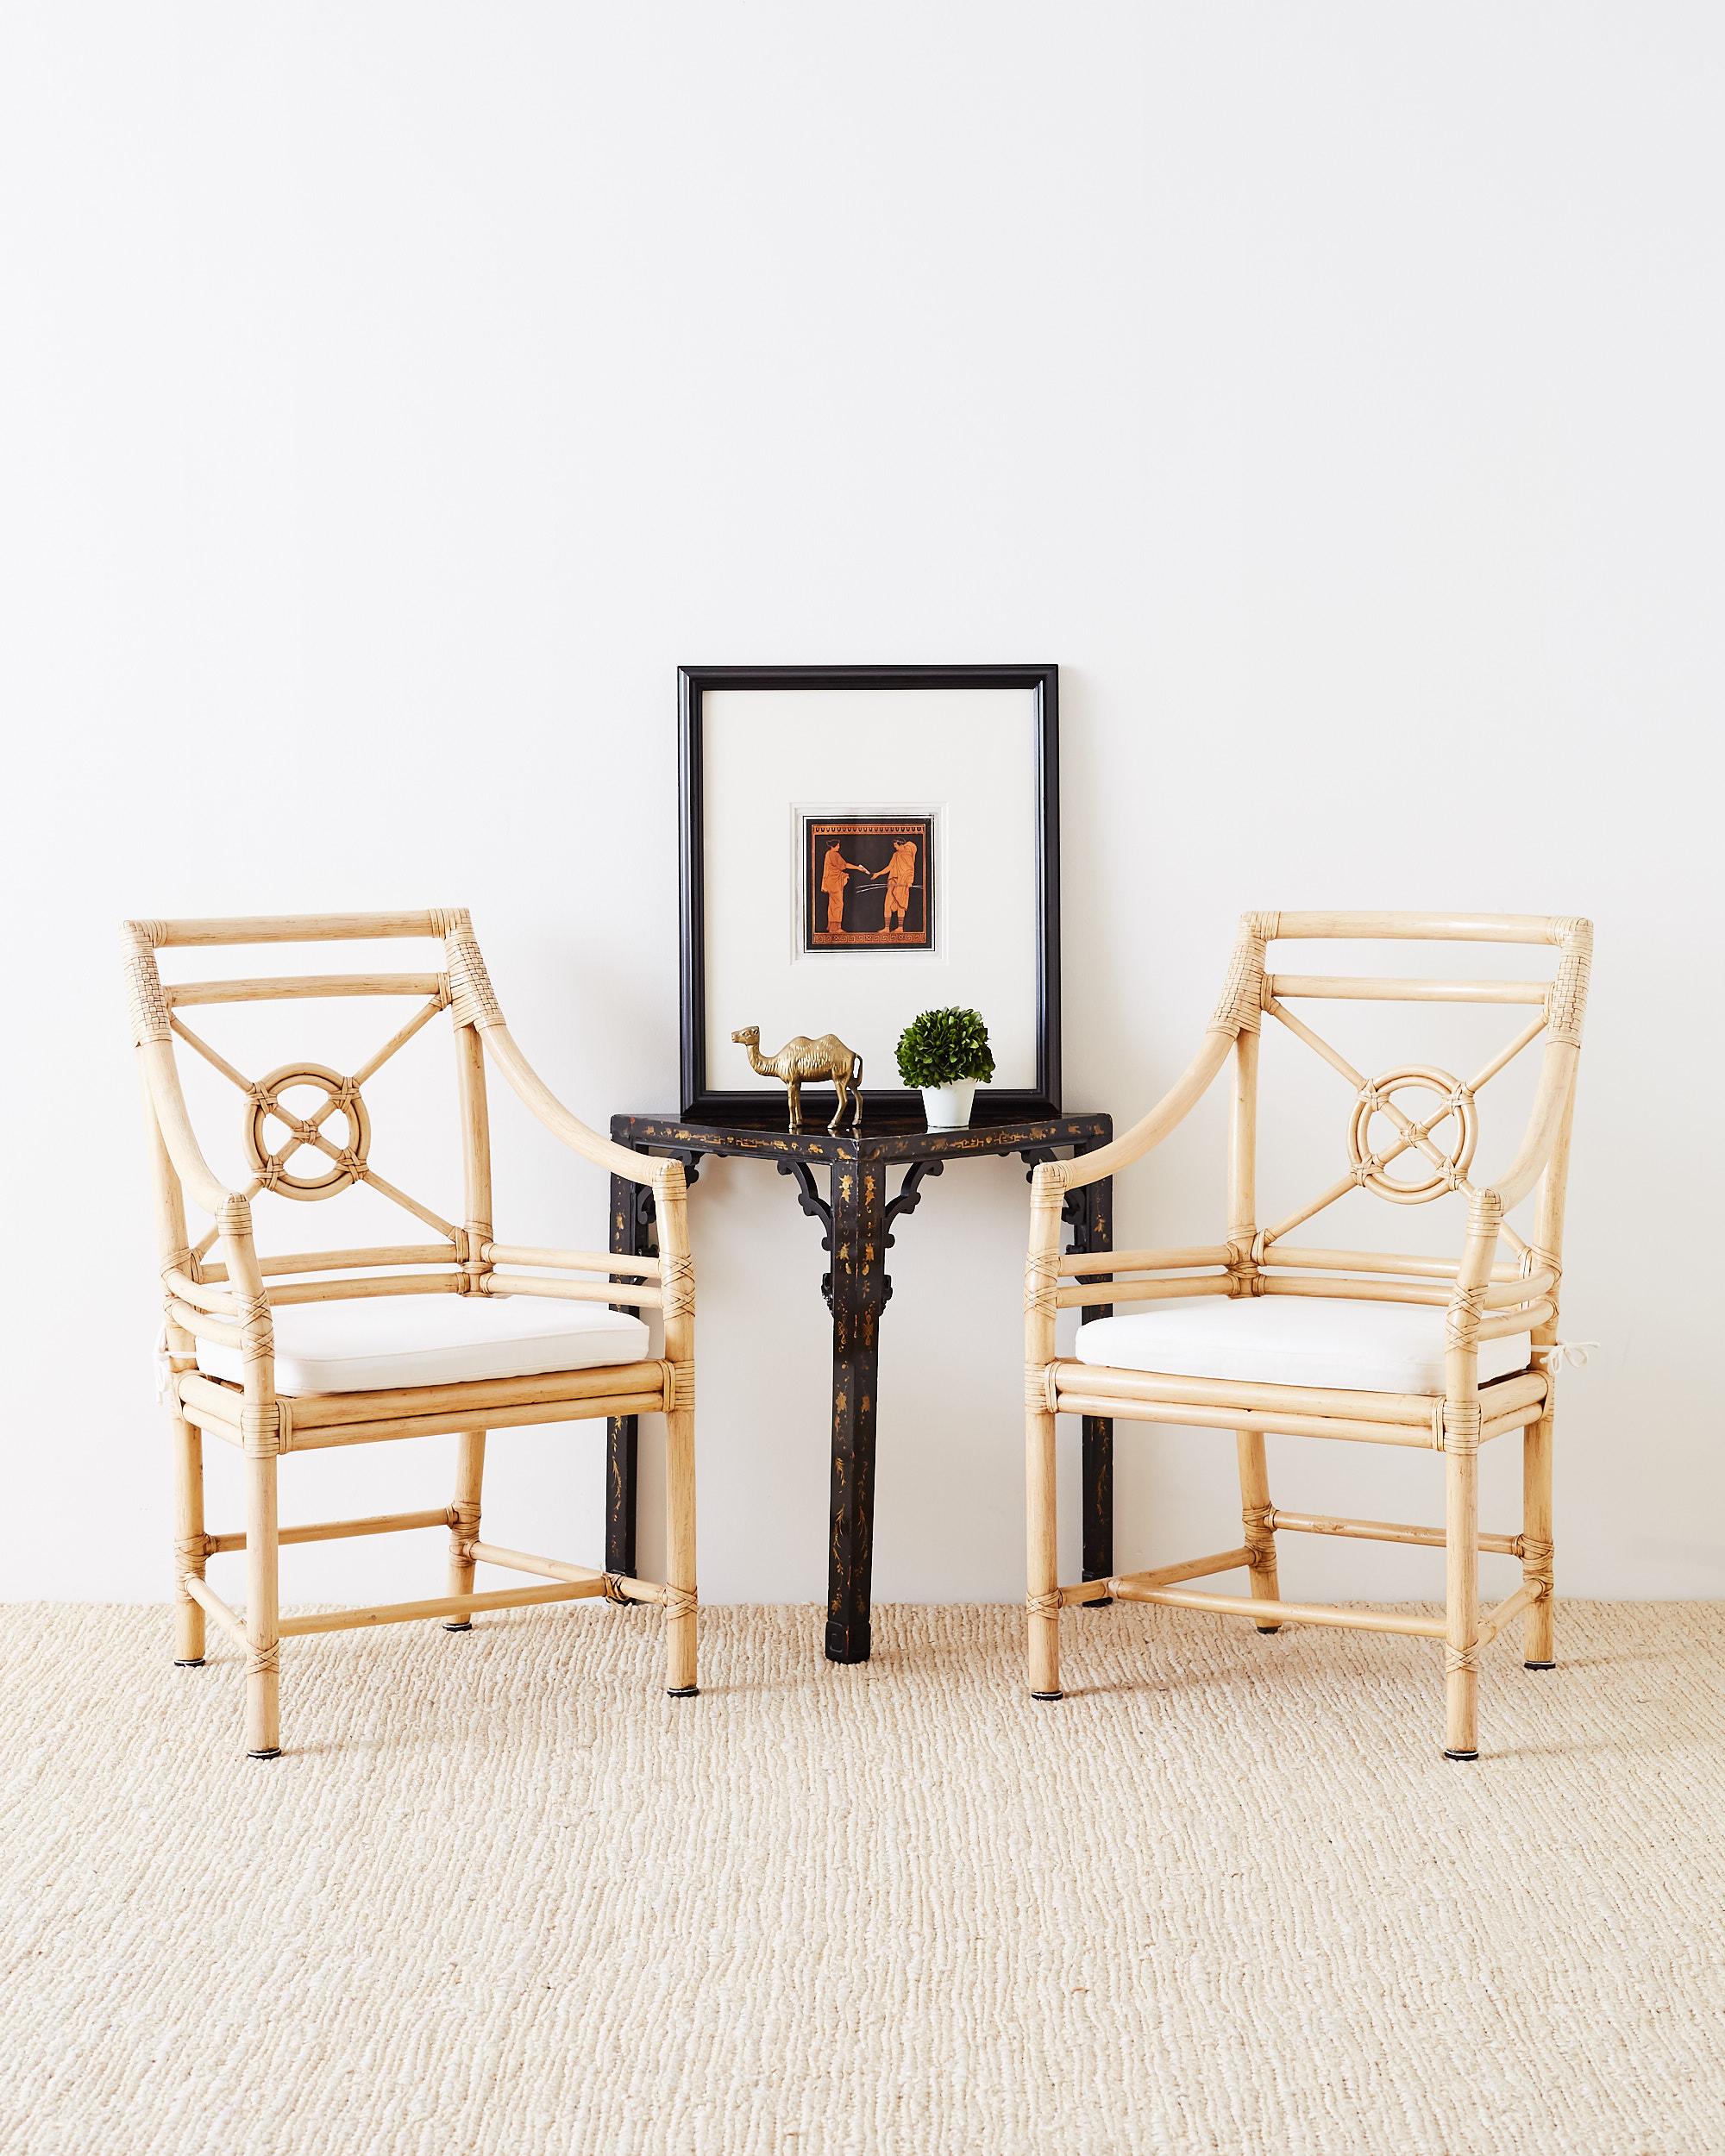 Light blonde pair of bamboo rattan lounge chairs made by McGuire featuring their popular target design backsplat. Constructed with an abundance of leather rawhide strapping in a decorative light color to match blonde finish frames. Soft white seat